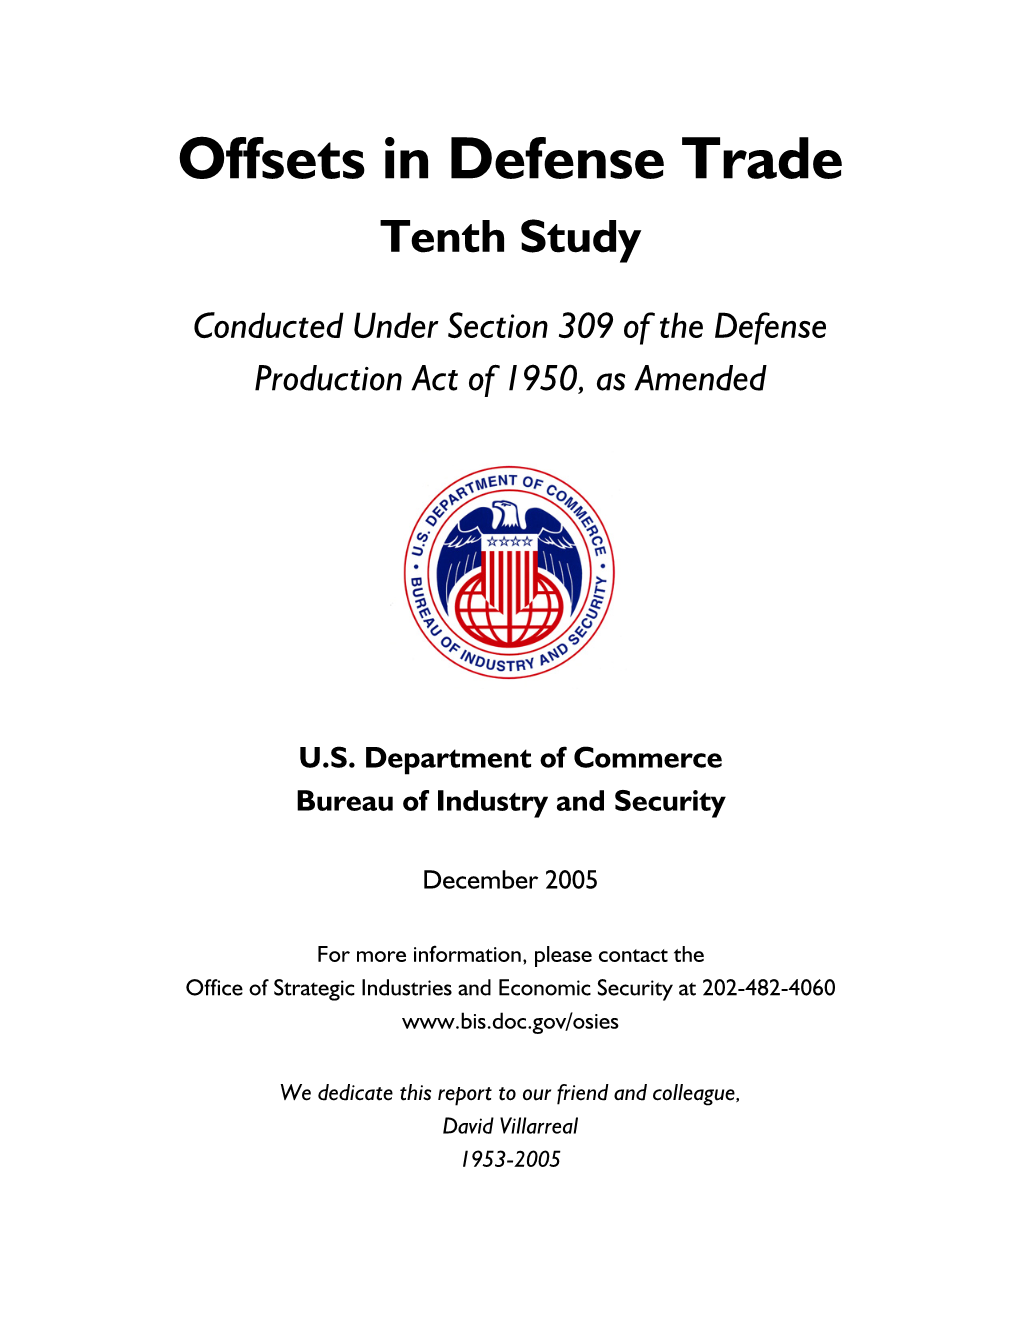 Offsets in Defense Trade Tenth Study